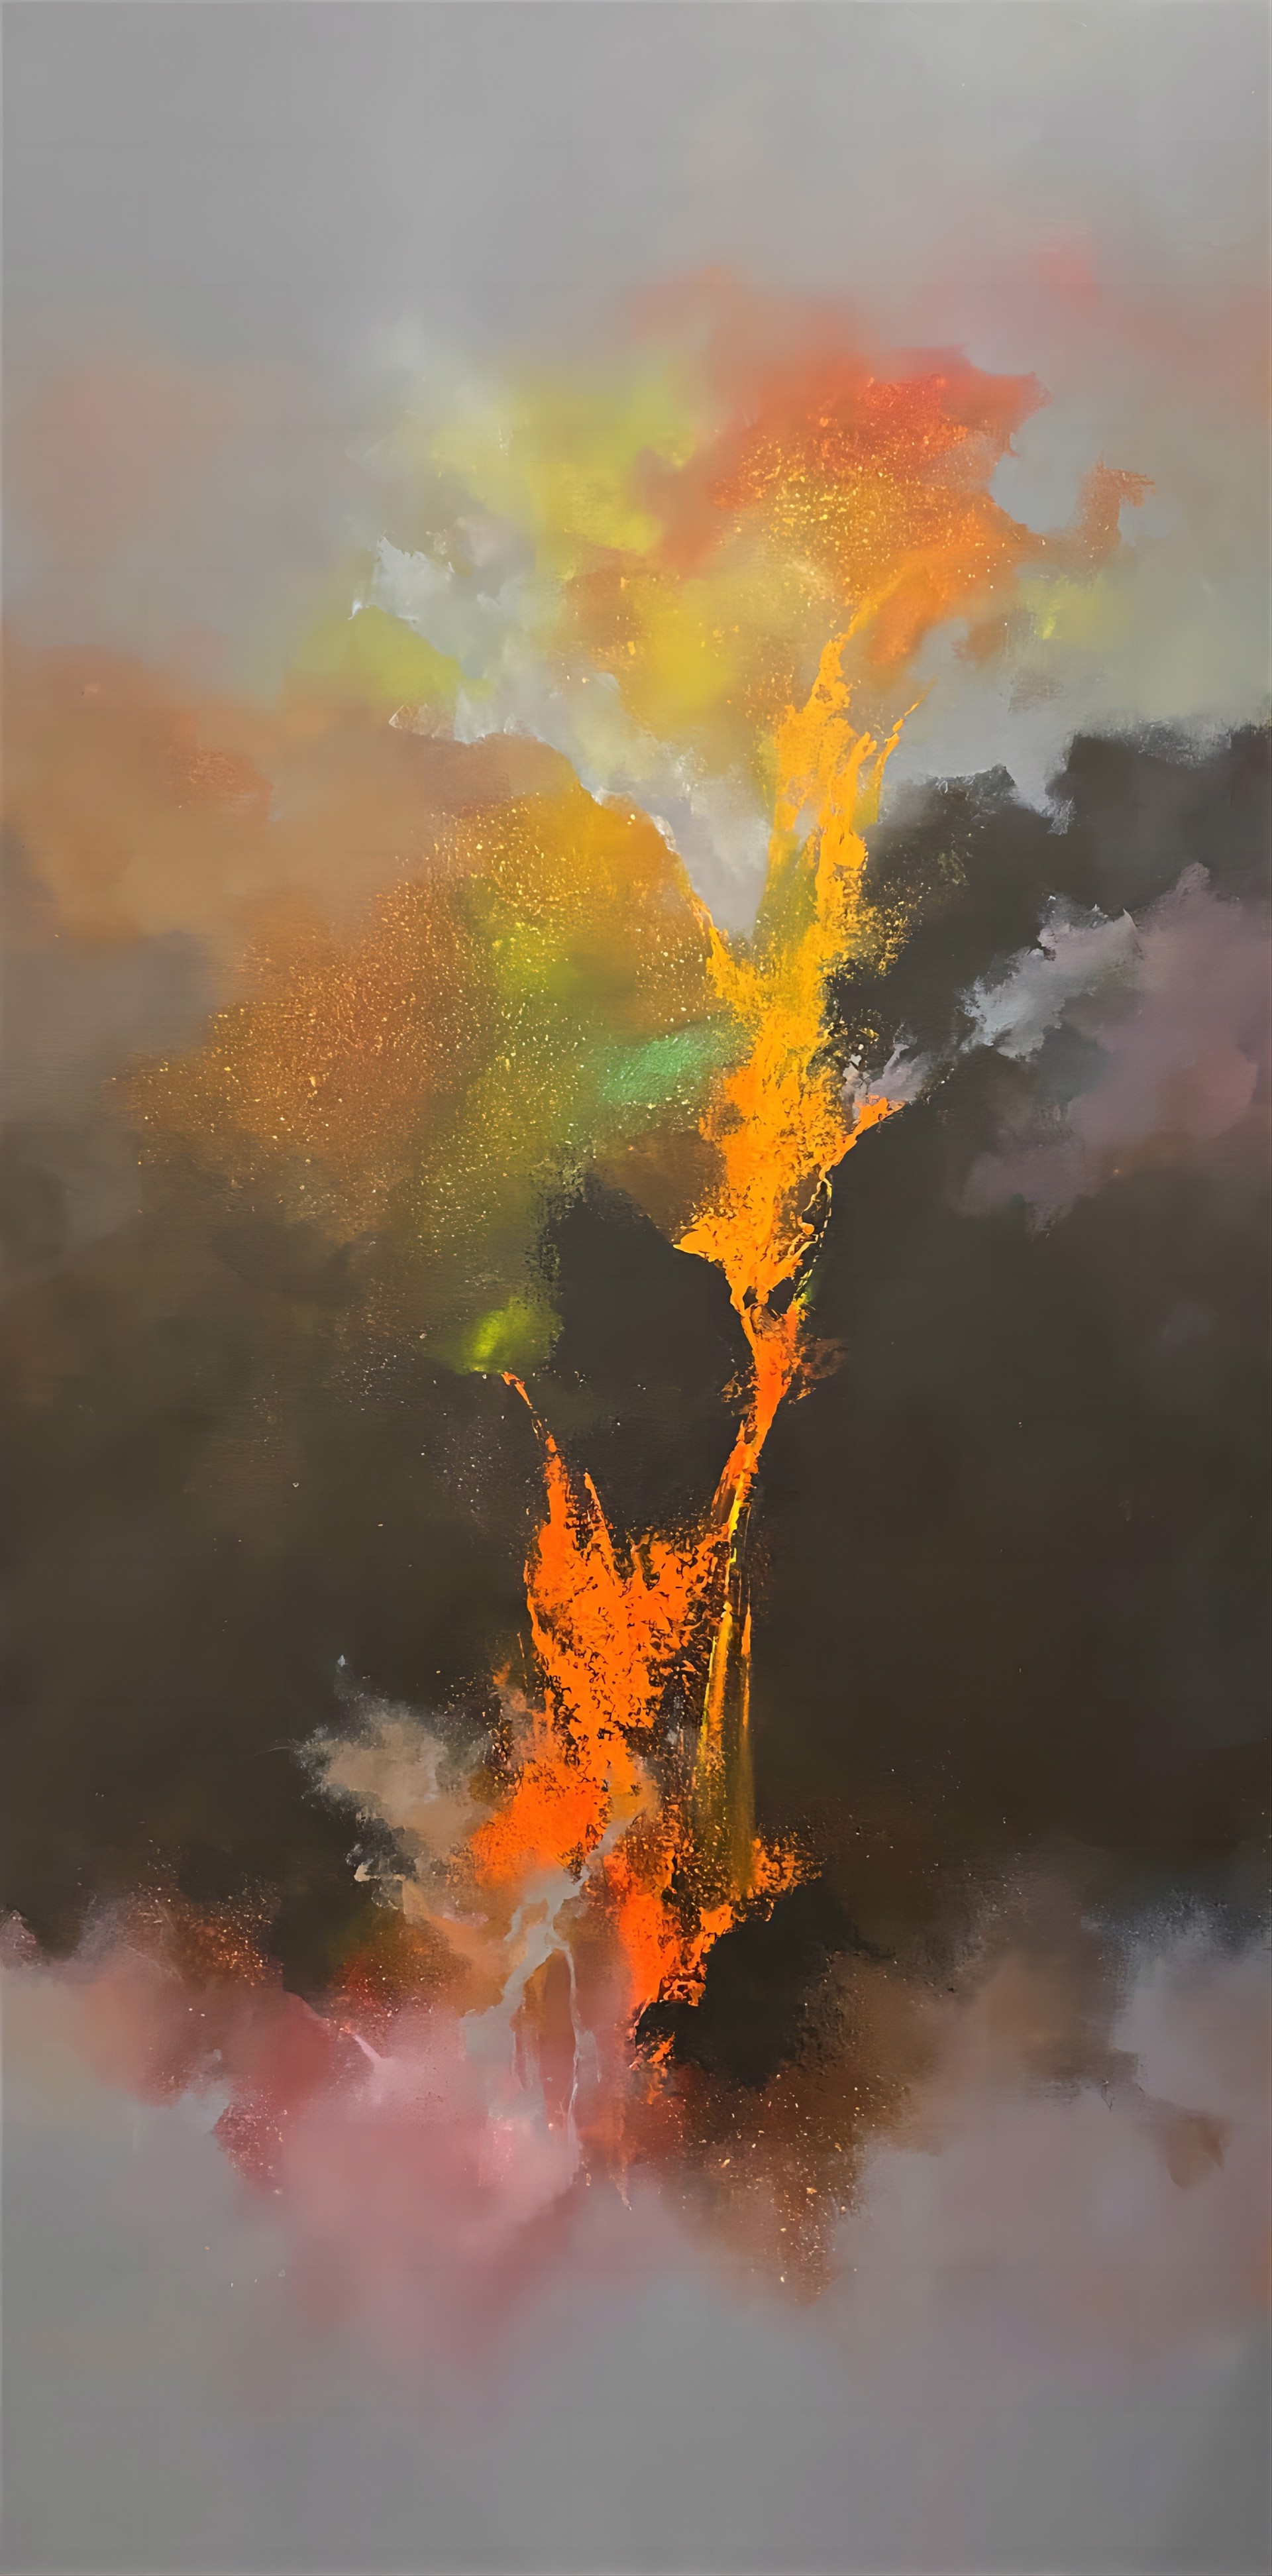 Pouring Lava by Thomas Leung